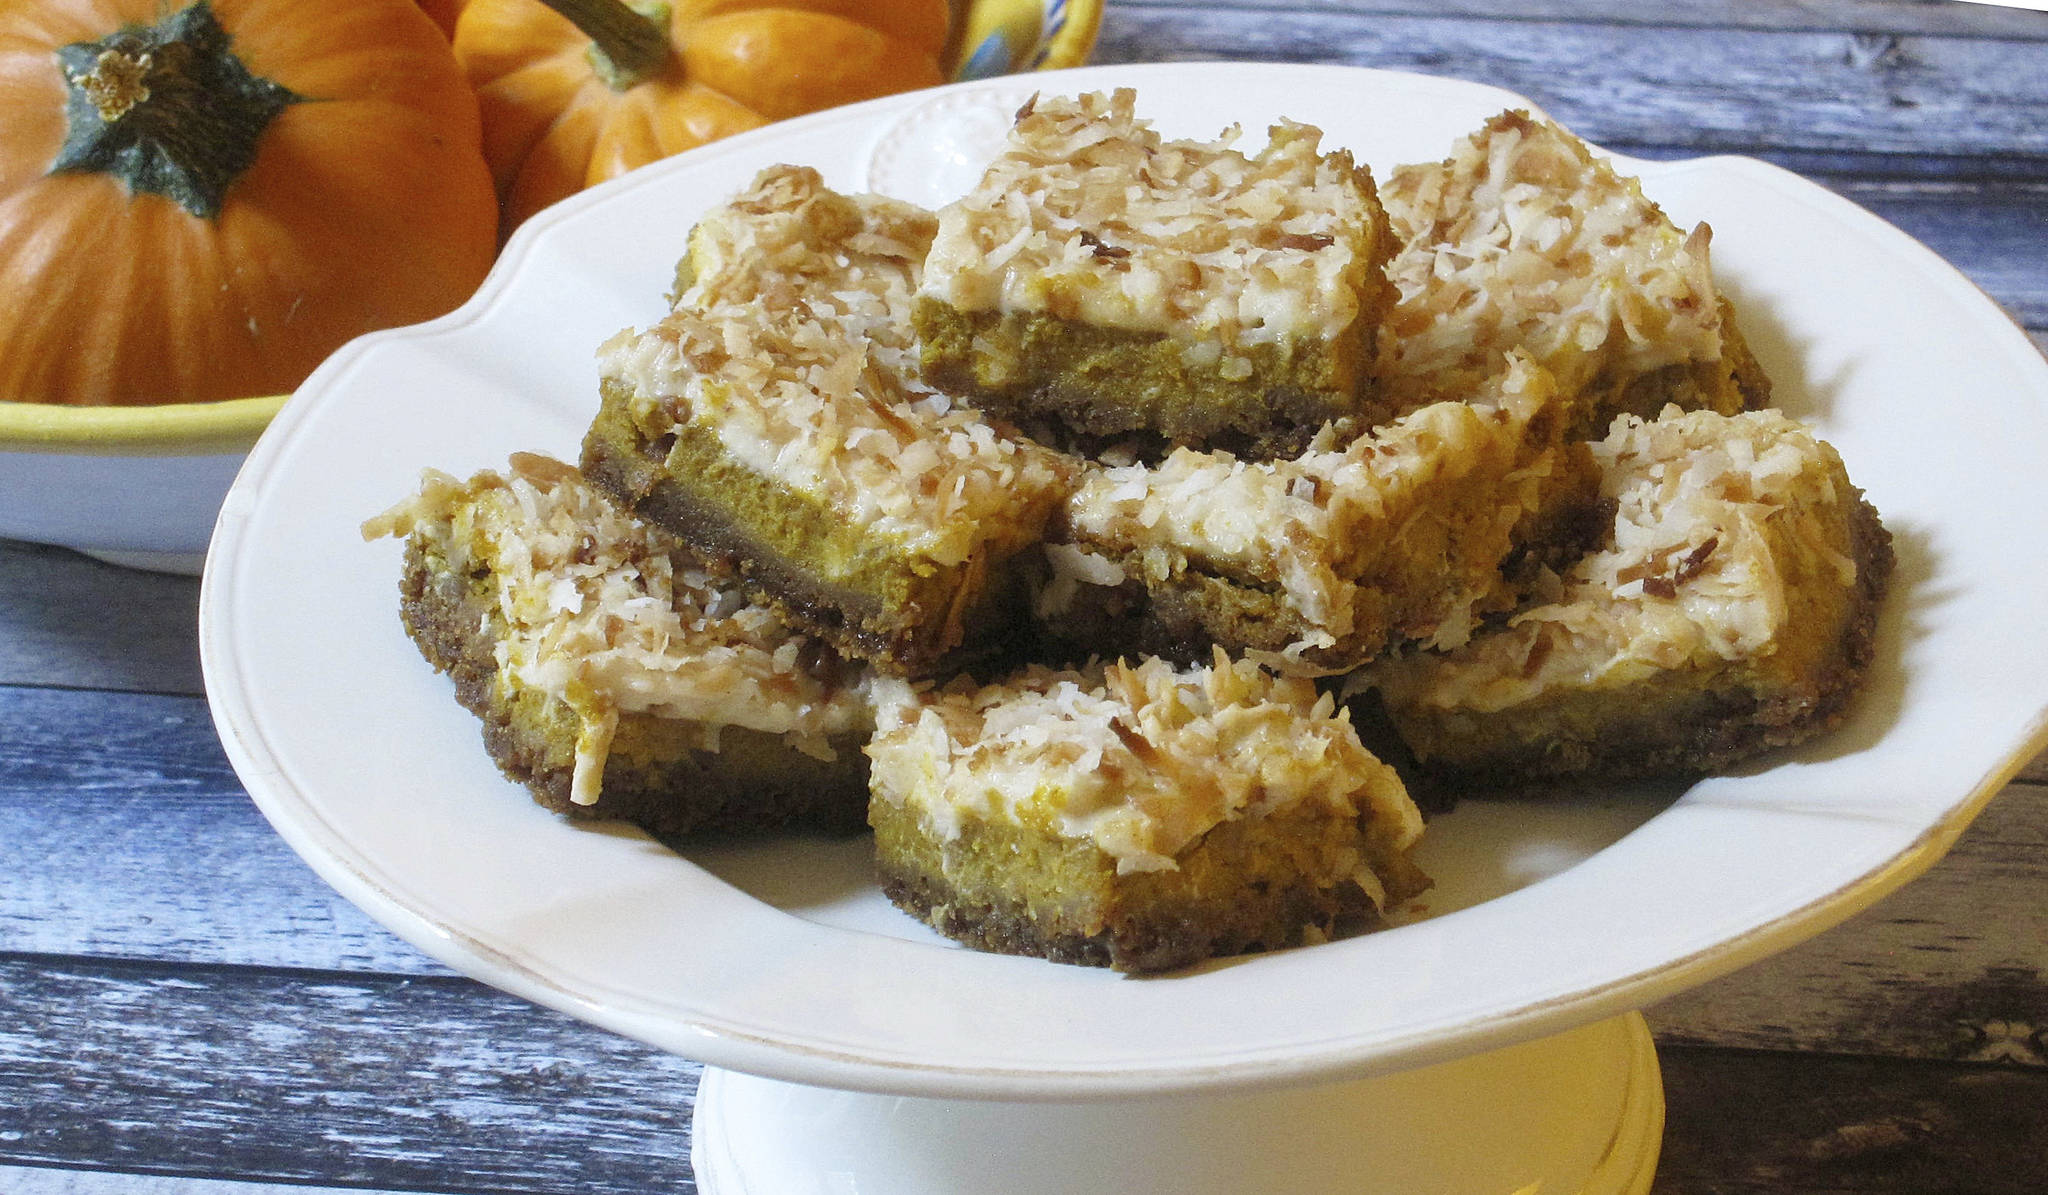 This Sept. 25 photo shows pumpkin coconut squares in New York. This dish is from a recipe by Sara Moulton. (Sara Moulton via AP)